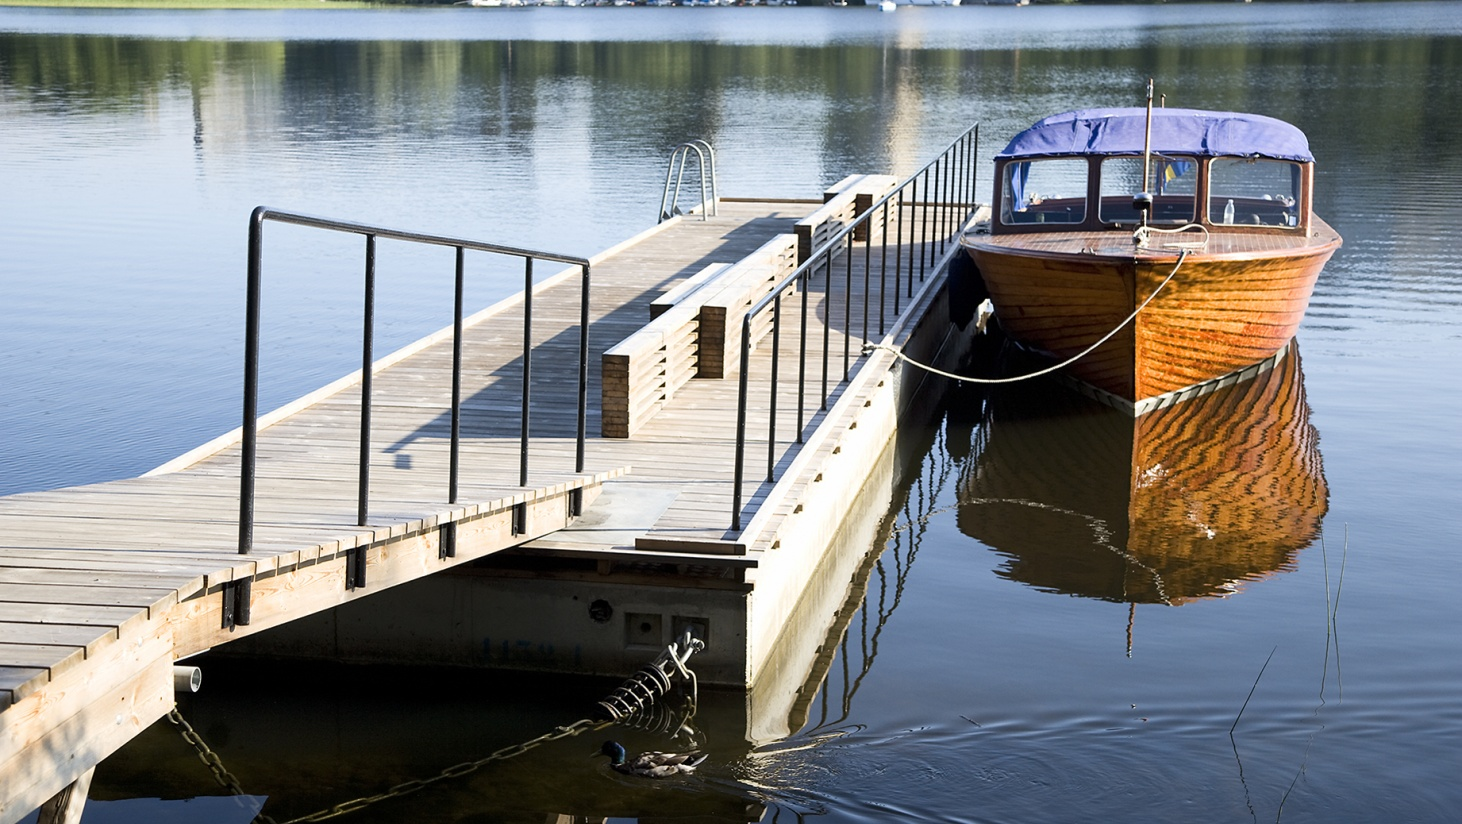 Kebony modified wood decking and boardwalk is beautiful, sustainable and recyclable.